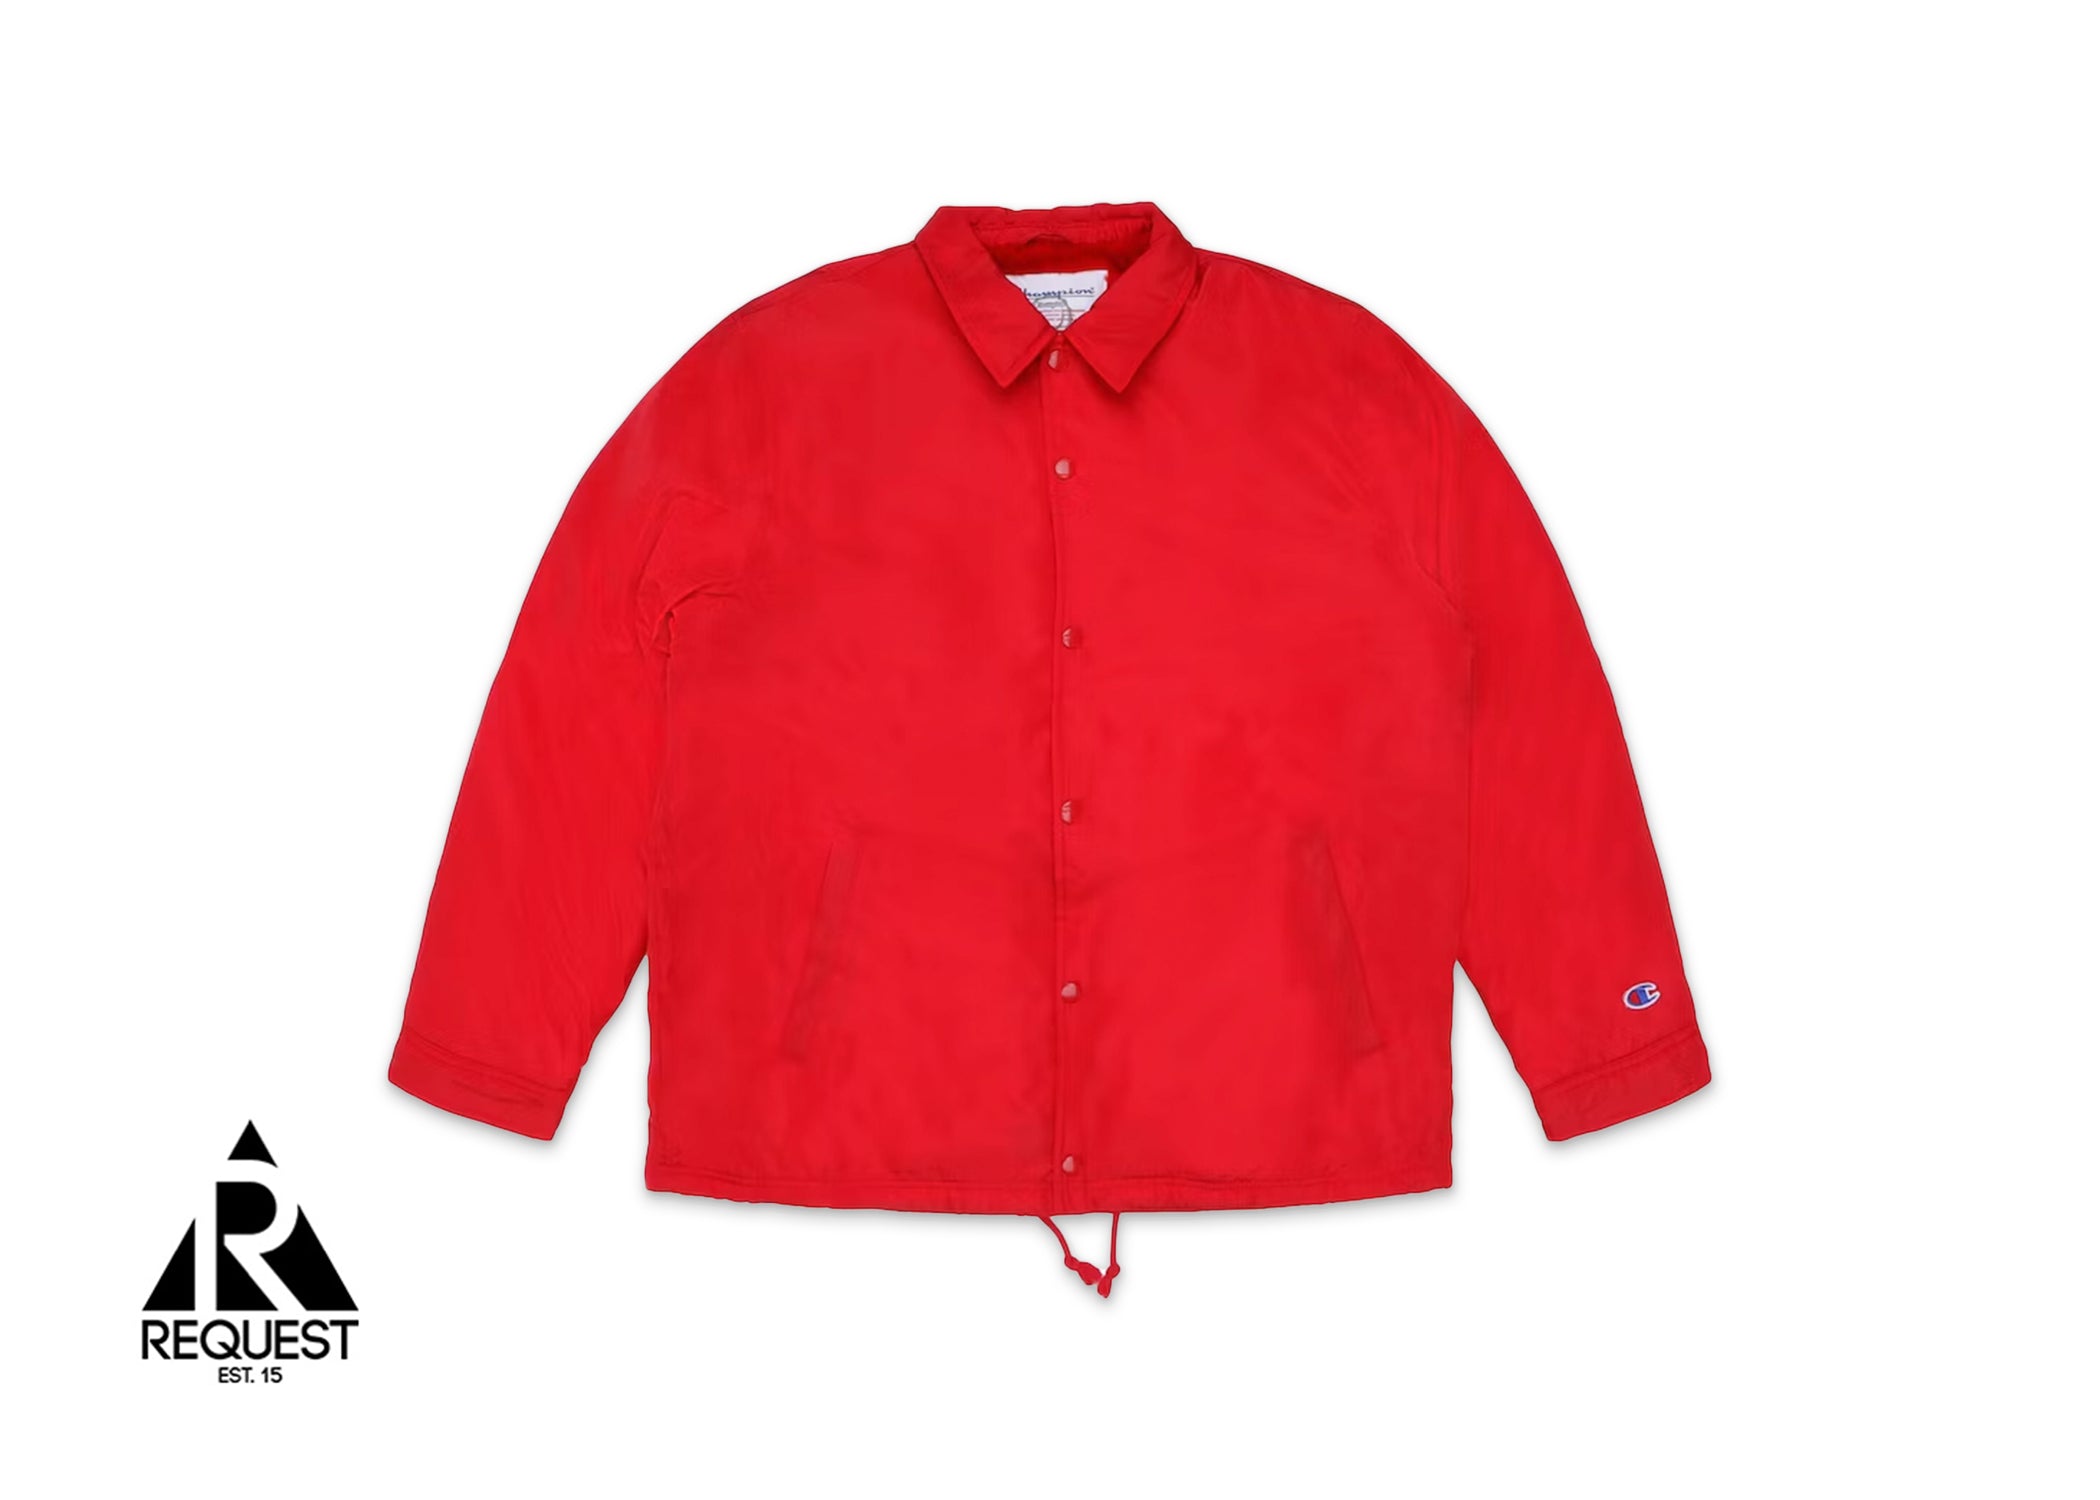 Supreme Champion Label Coaches Jacket "Red"